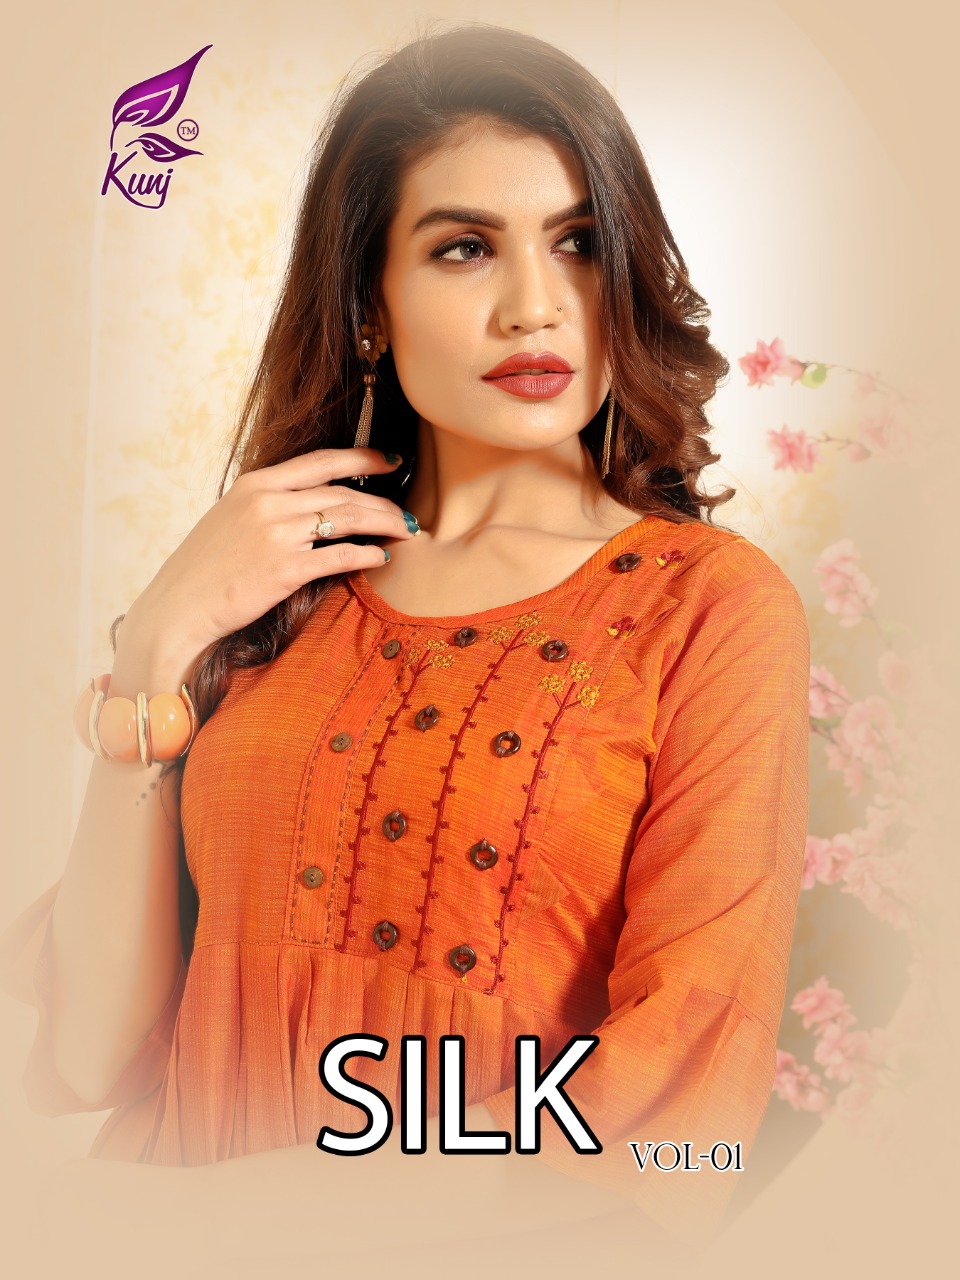 Kunj Silk Vol 1 Rayon Different Type Of Embroidery Work Hand...